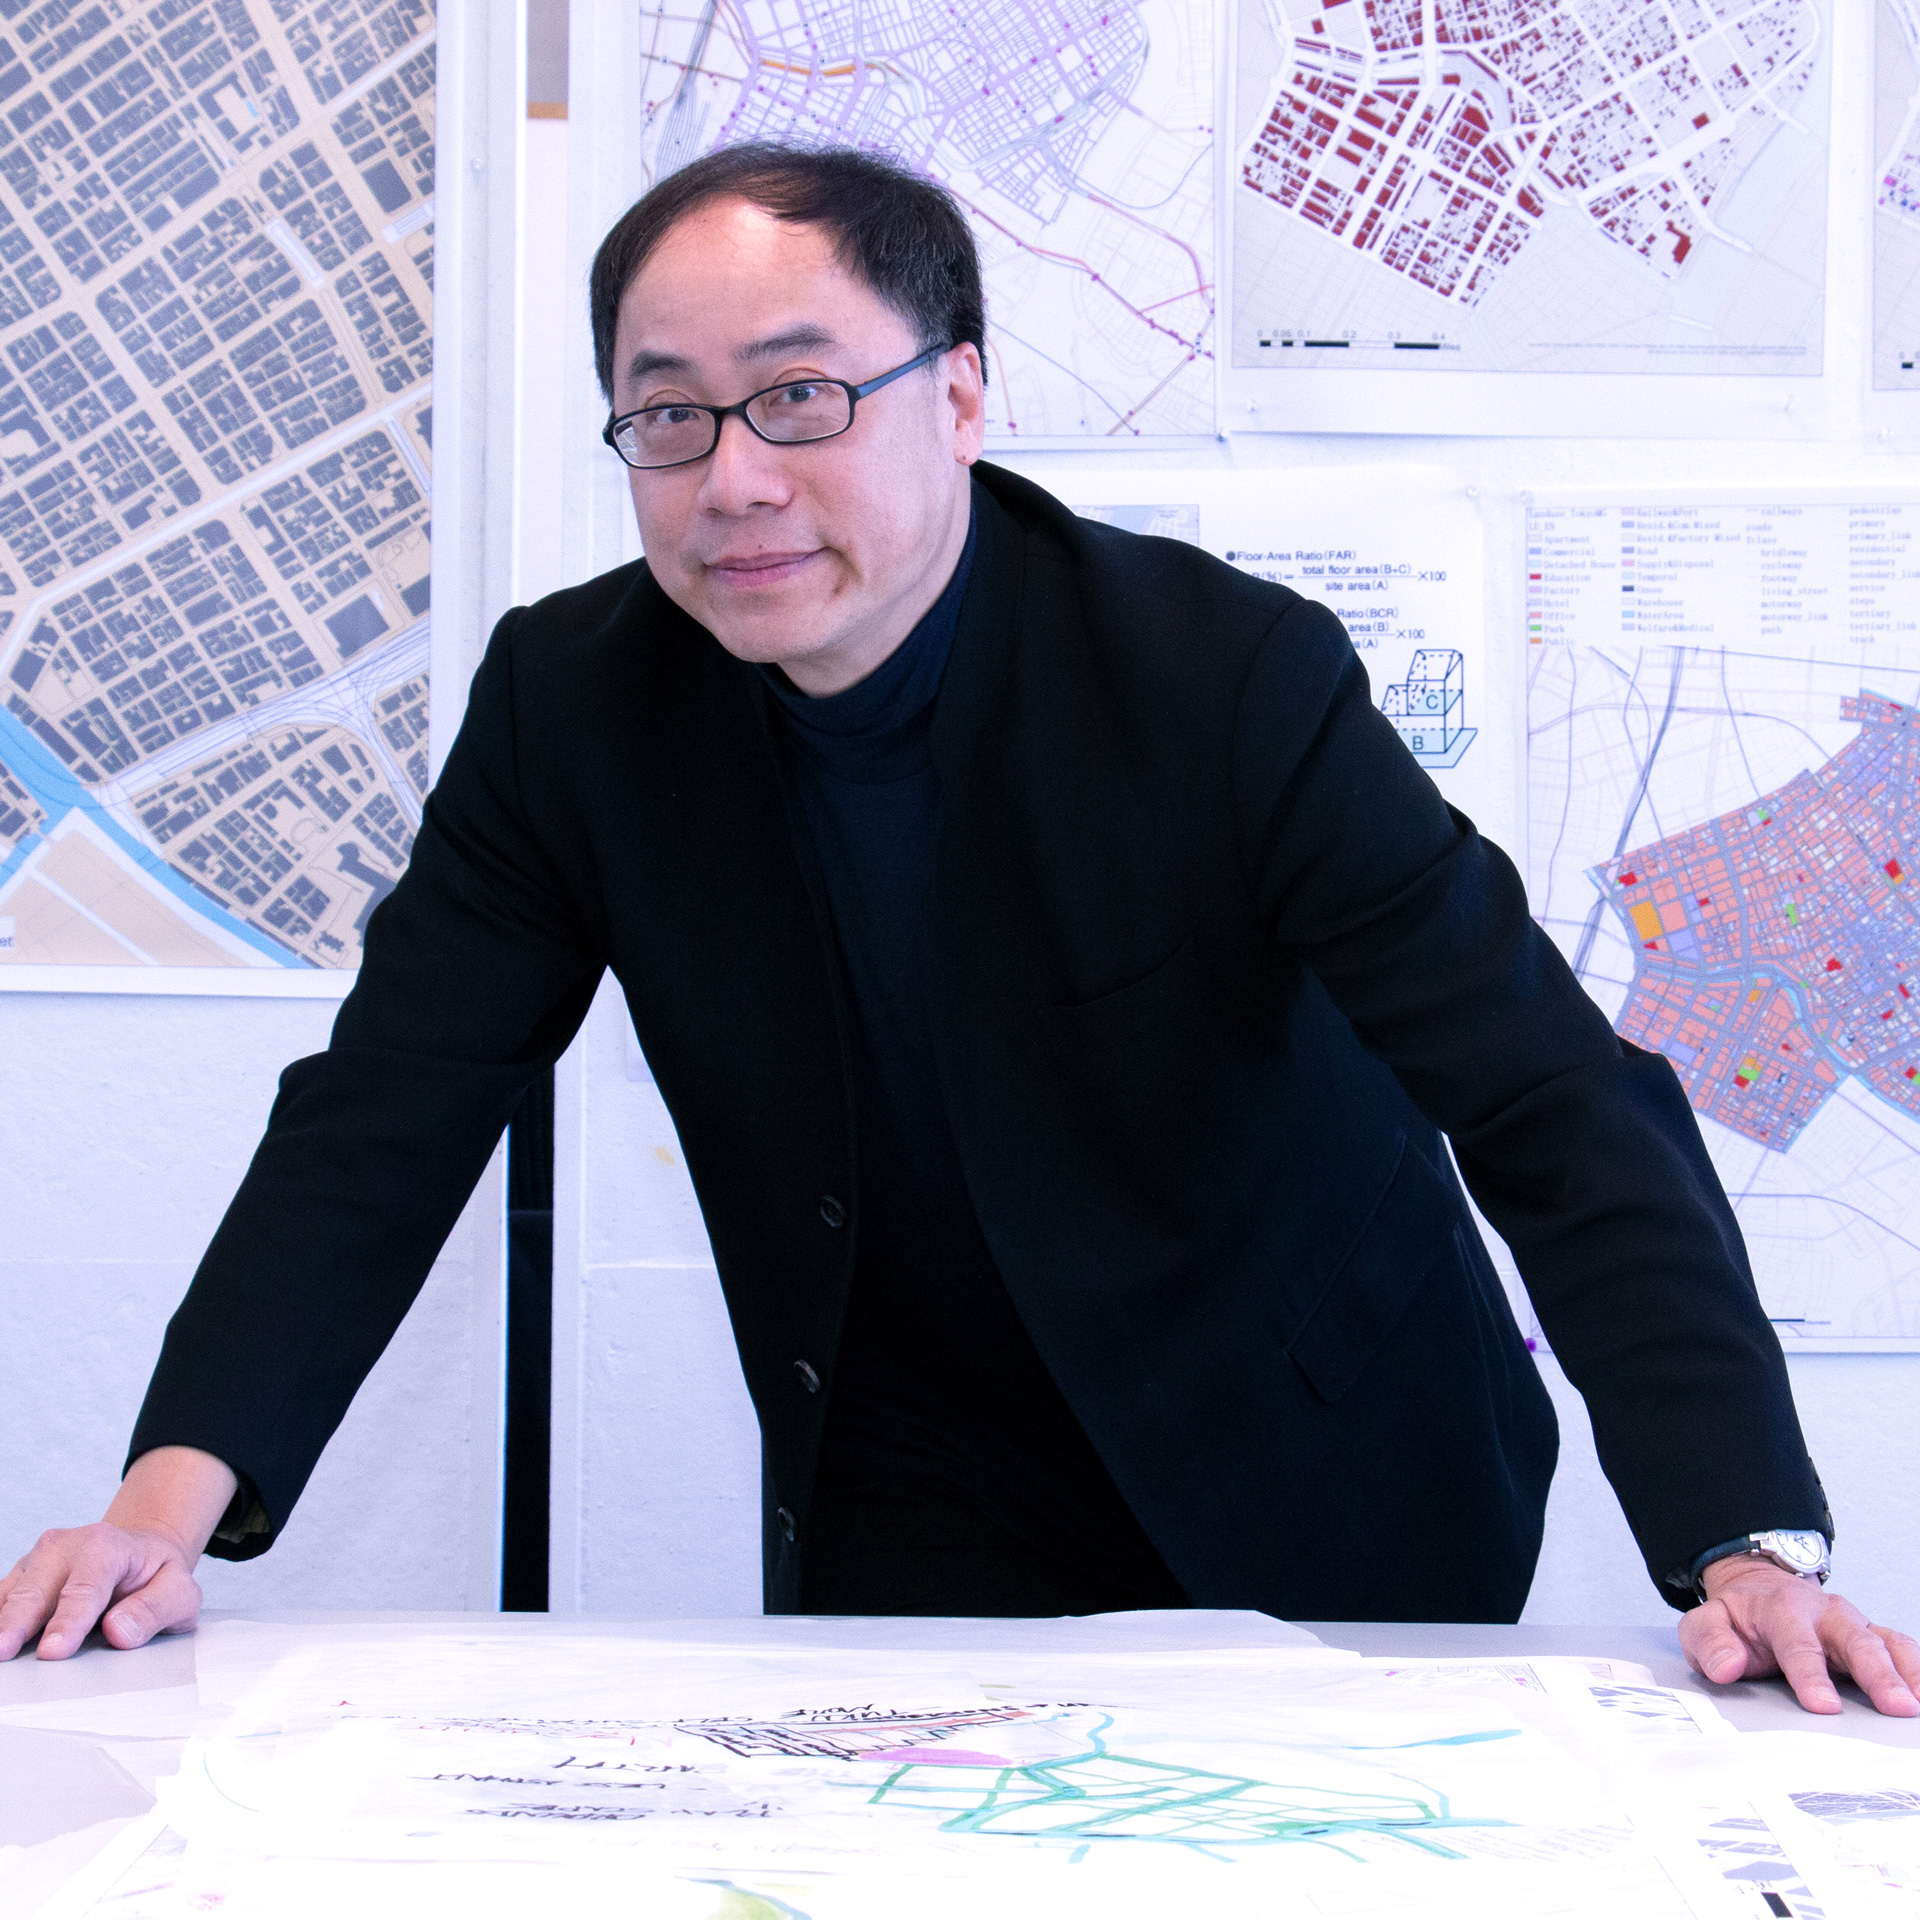 Perry Yang with Tokyo Smart City designs, in the Eco Urban Lab